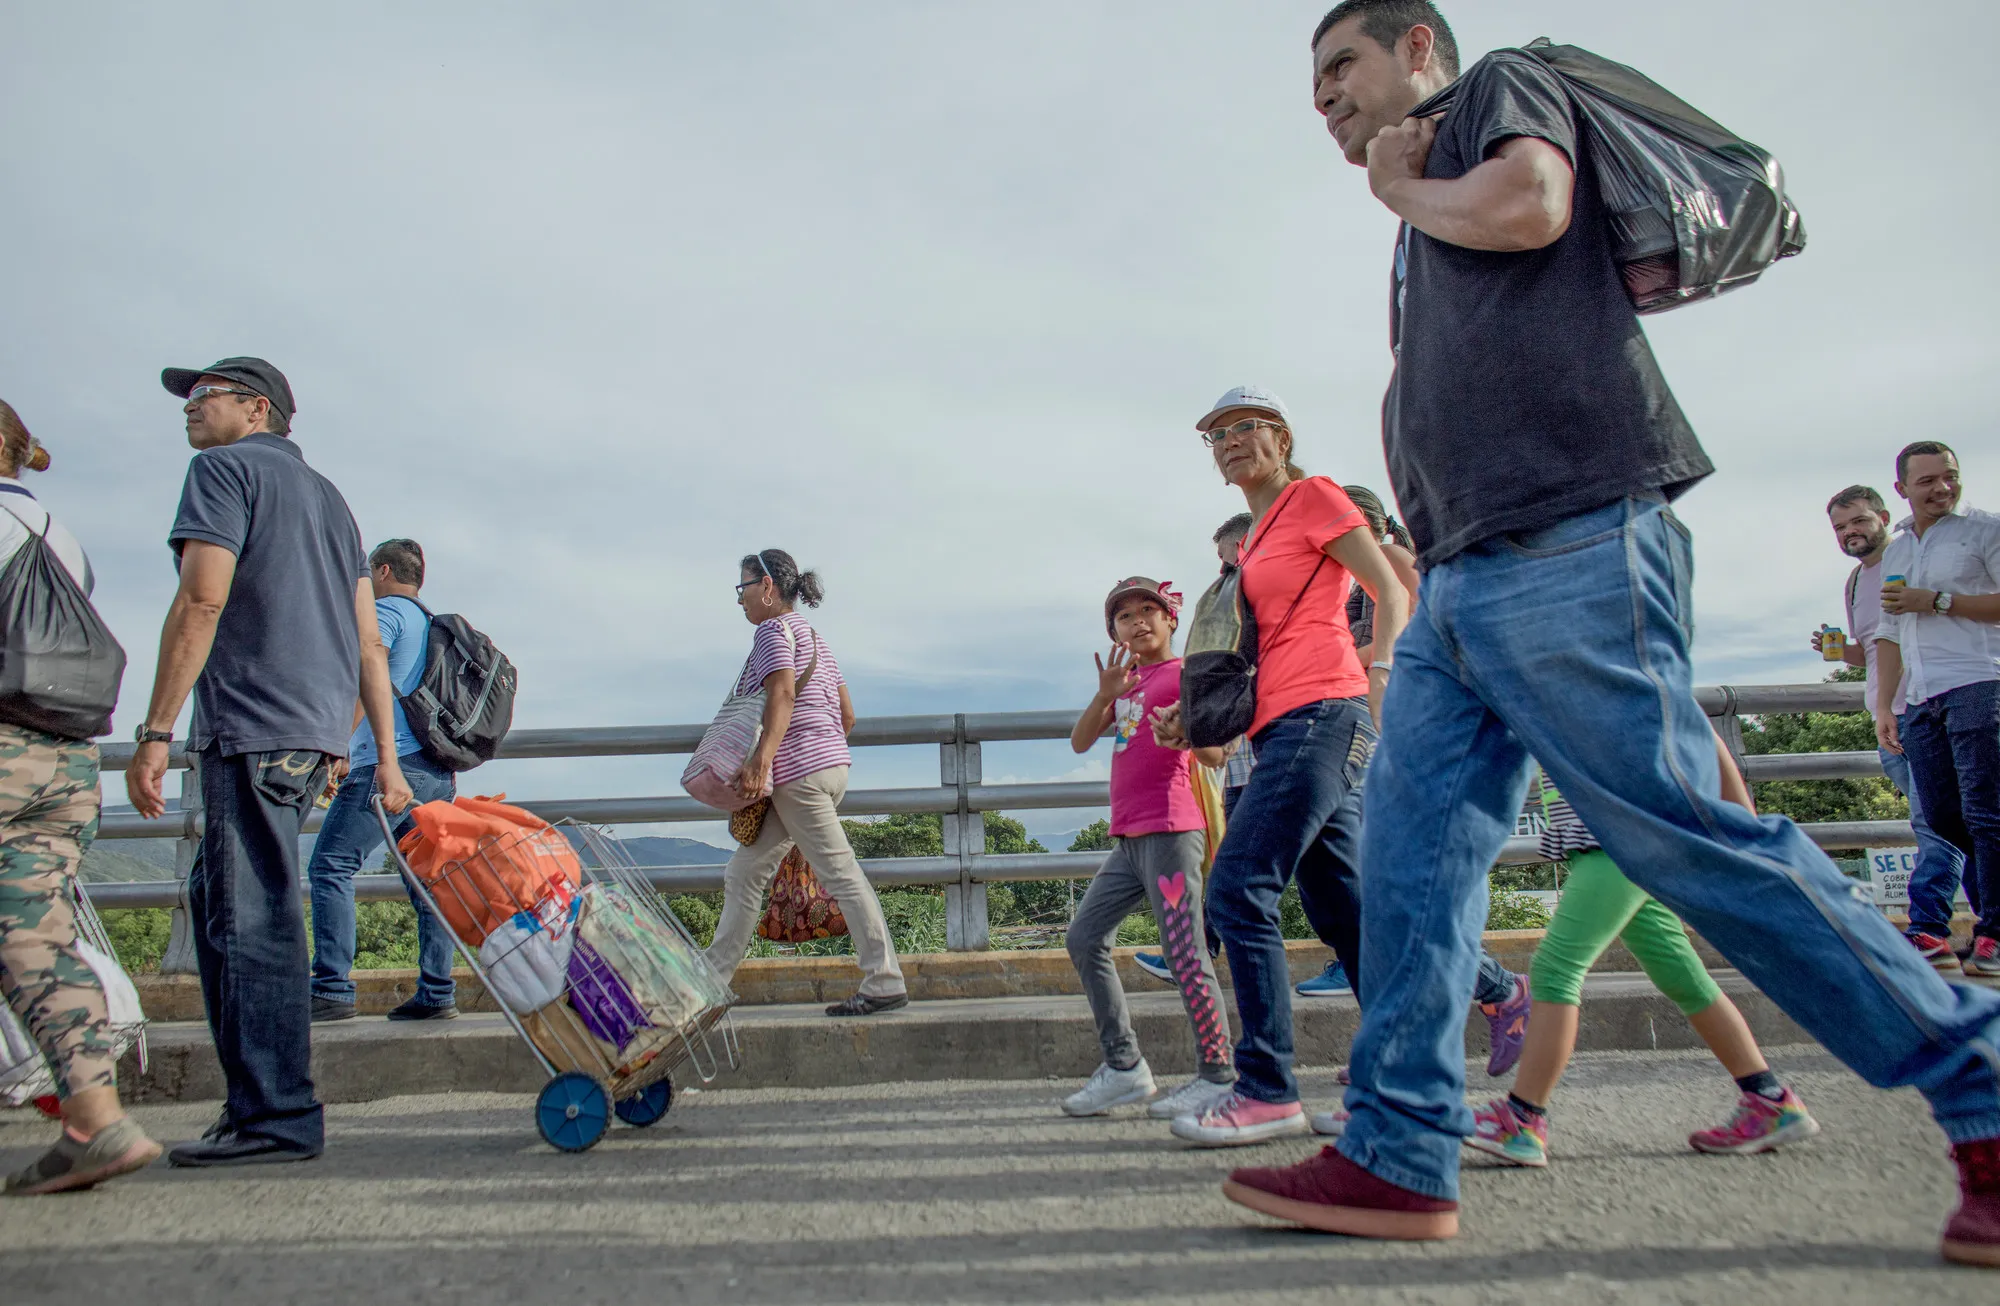 Every day there is a constant stream of migrants passing in each direction, at the border crossing between Venezuela and Colombia in the city of Cucuta on May 8, 2019. Some are pendulum migrants working and living in both places and others who have come to flee Venezuela.